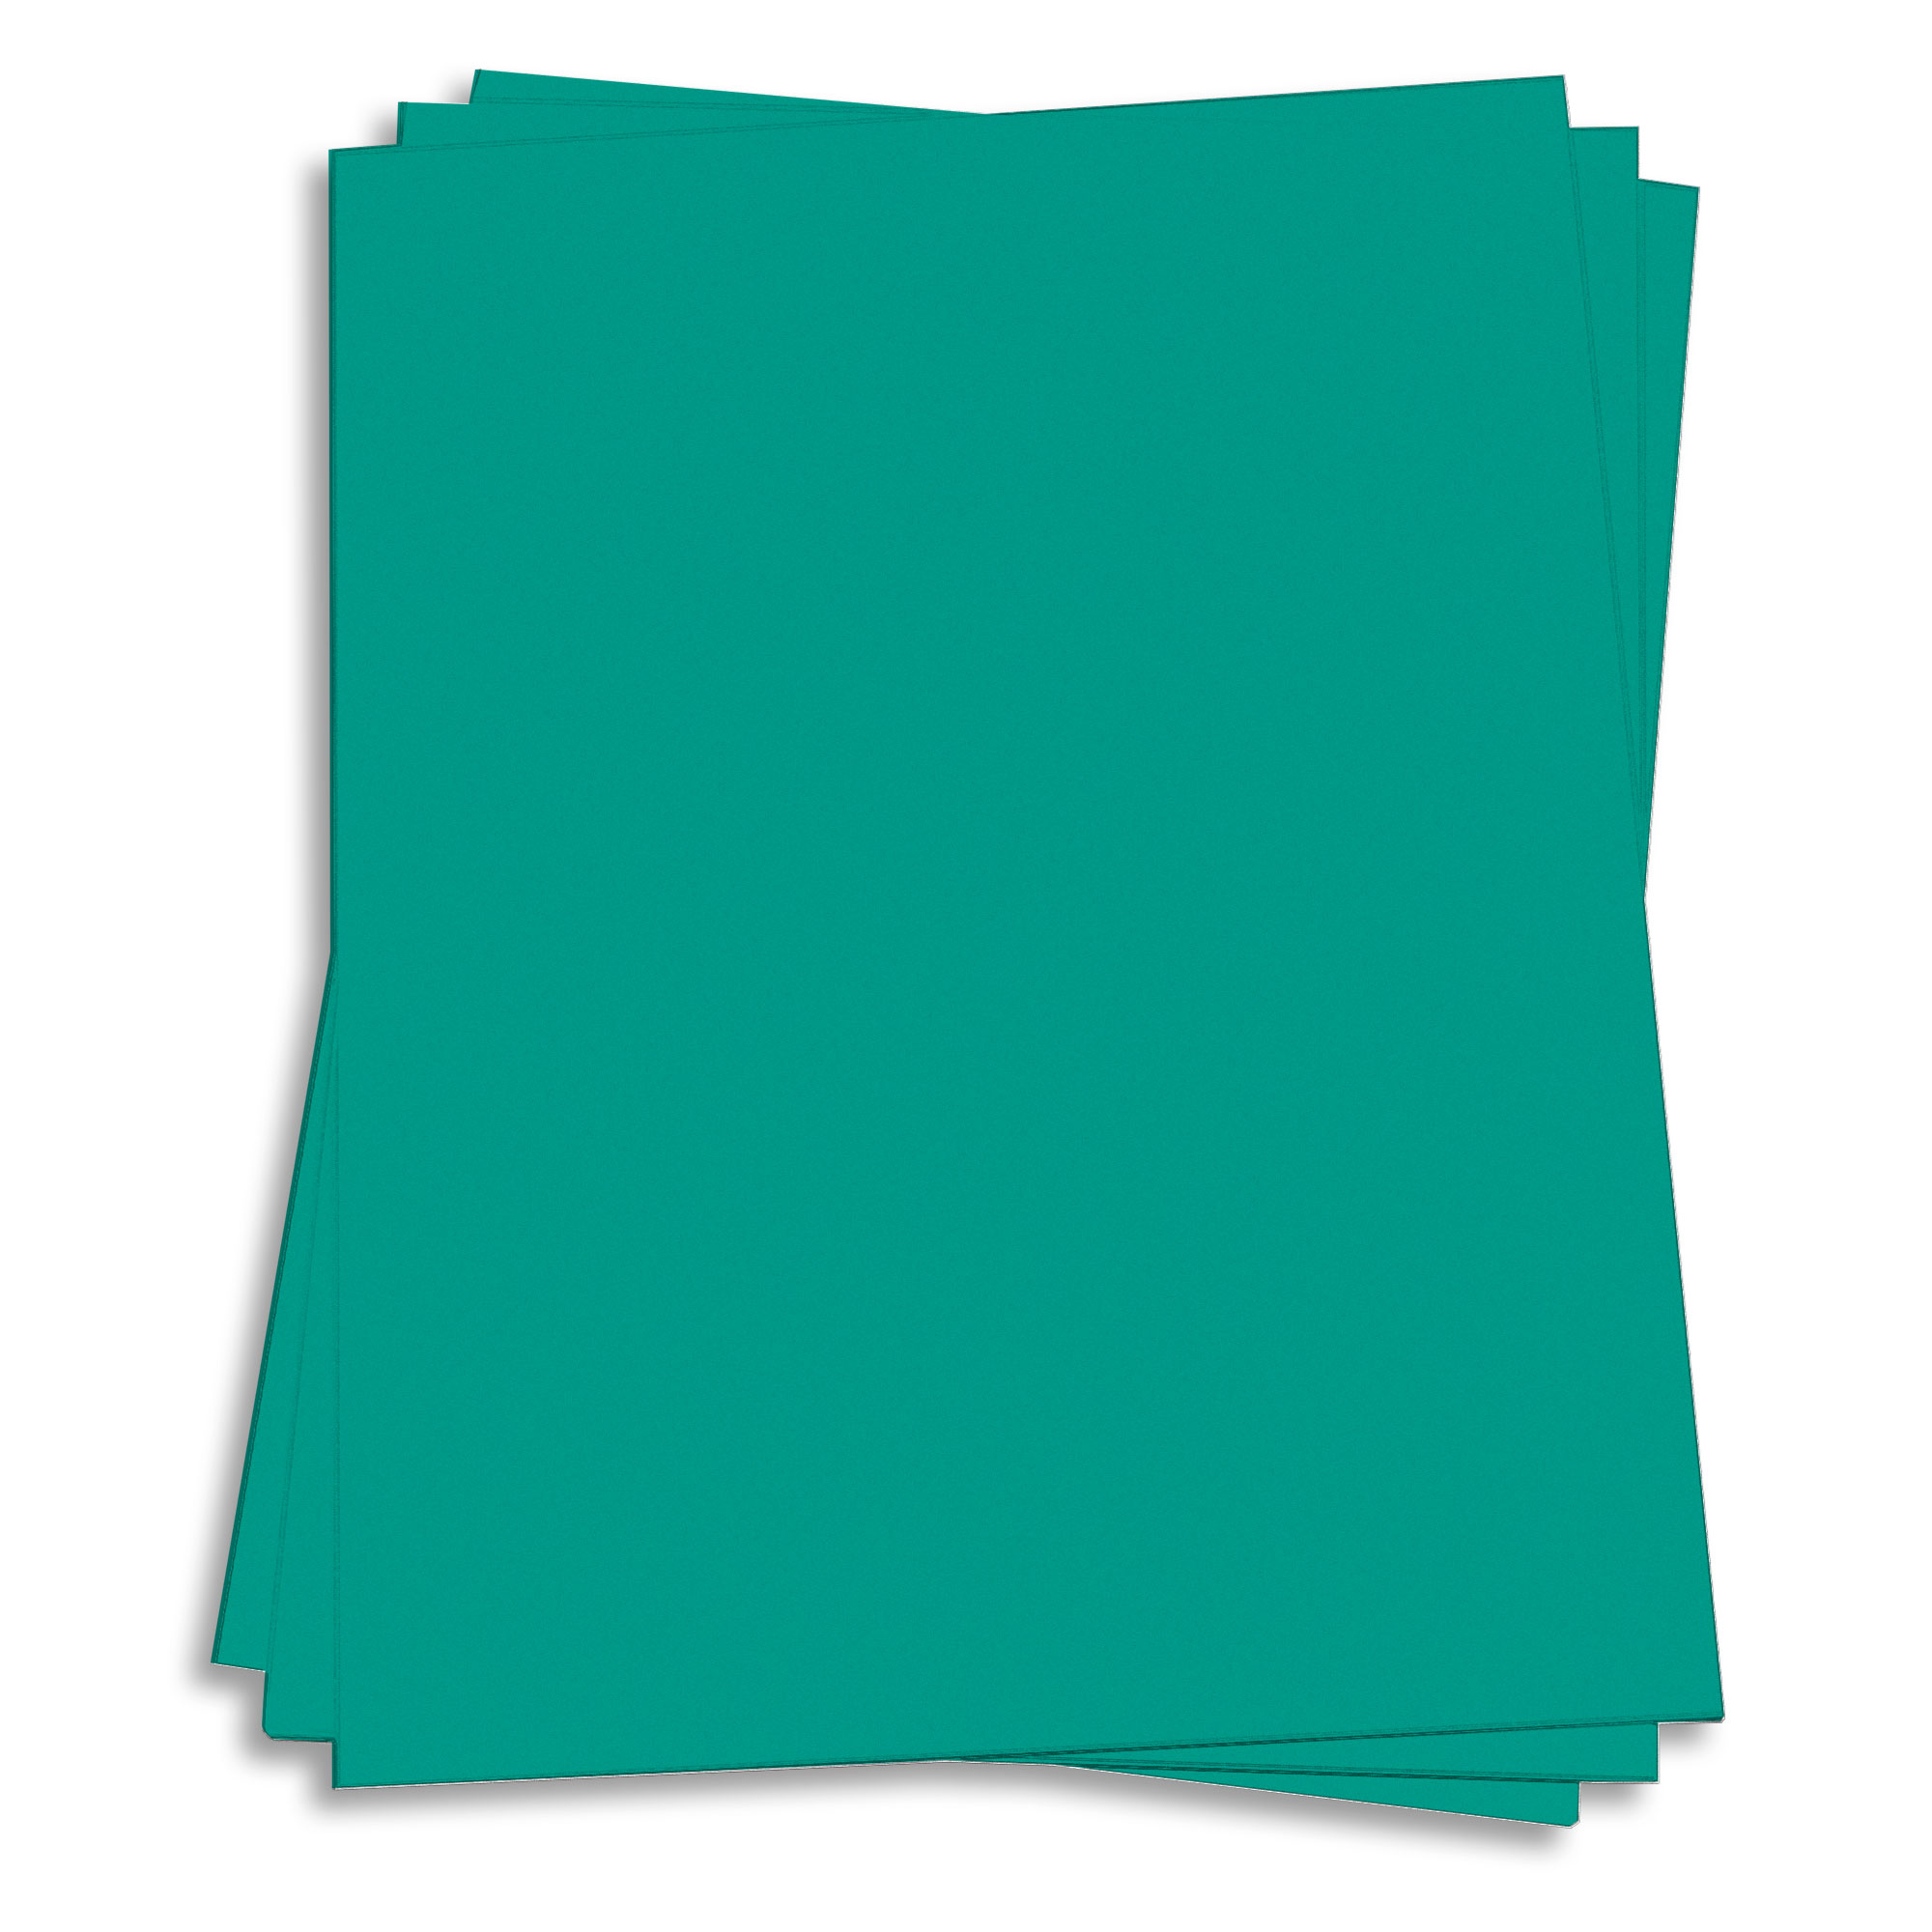 Terrestrial Teal Green Card Stock - 8 1/2 x 11 65lb Cover